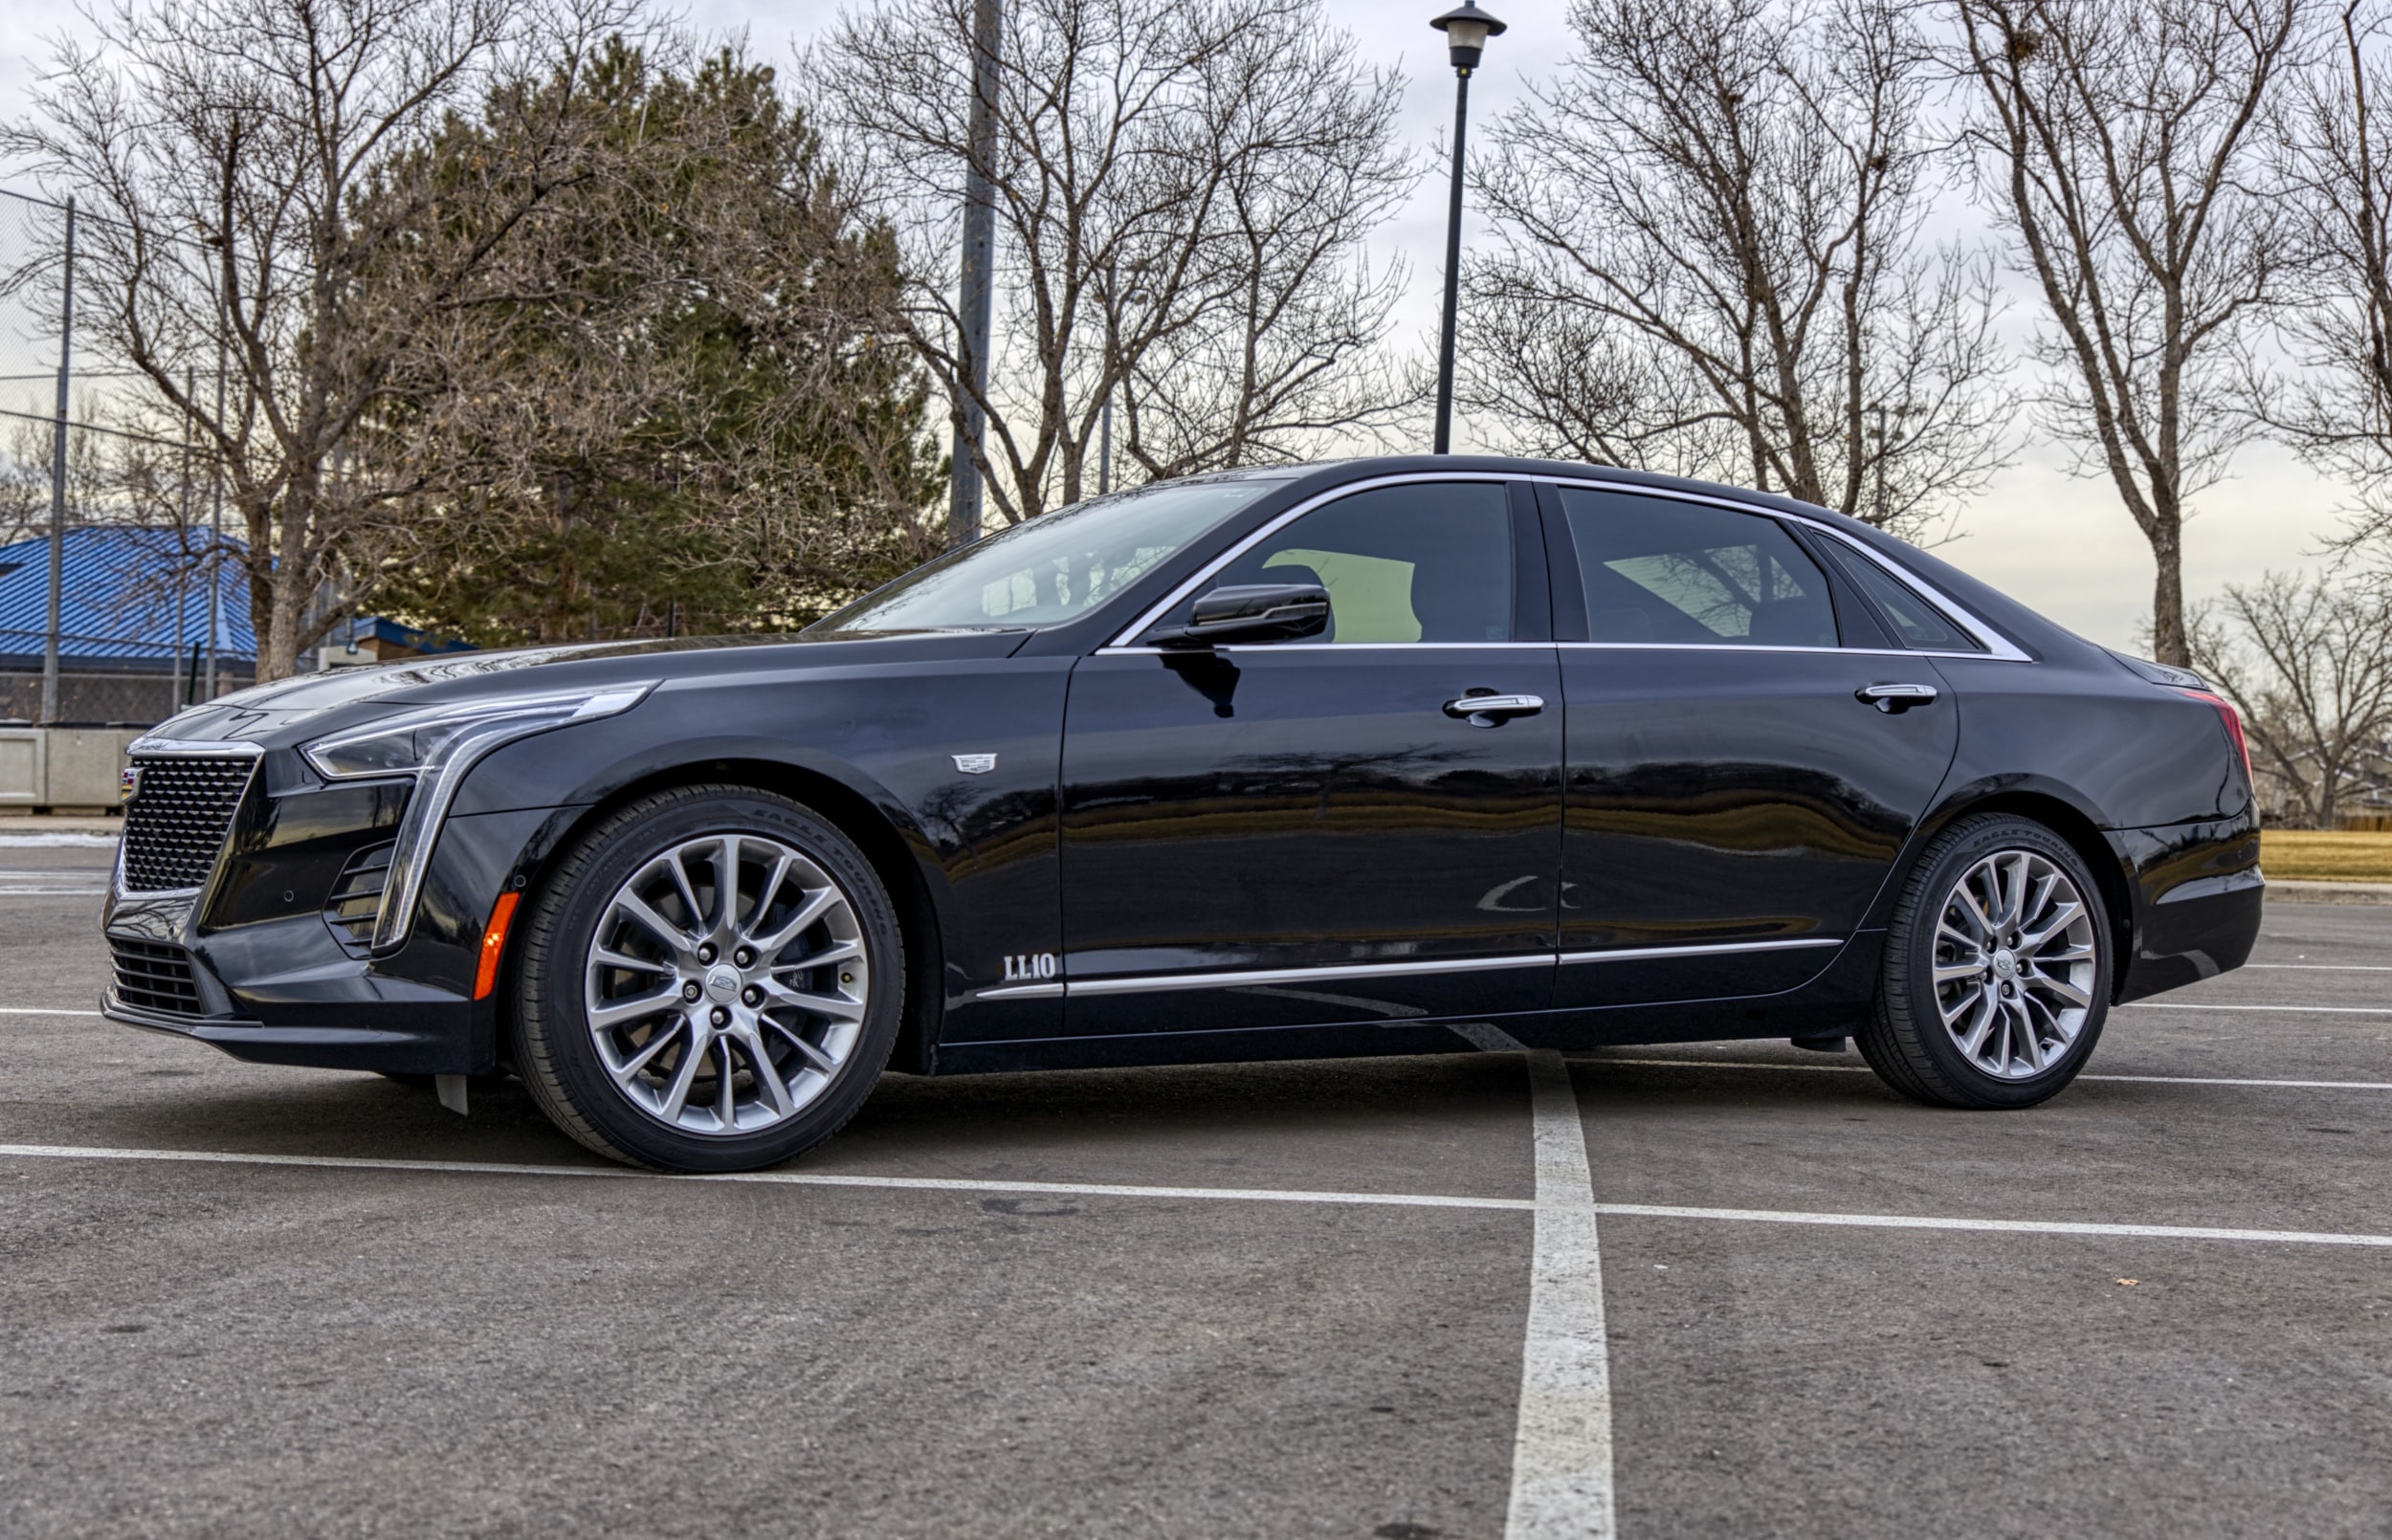 A black Cadillac CT6 with a reflective shine and beautiful wheels.